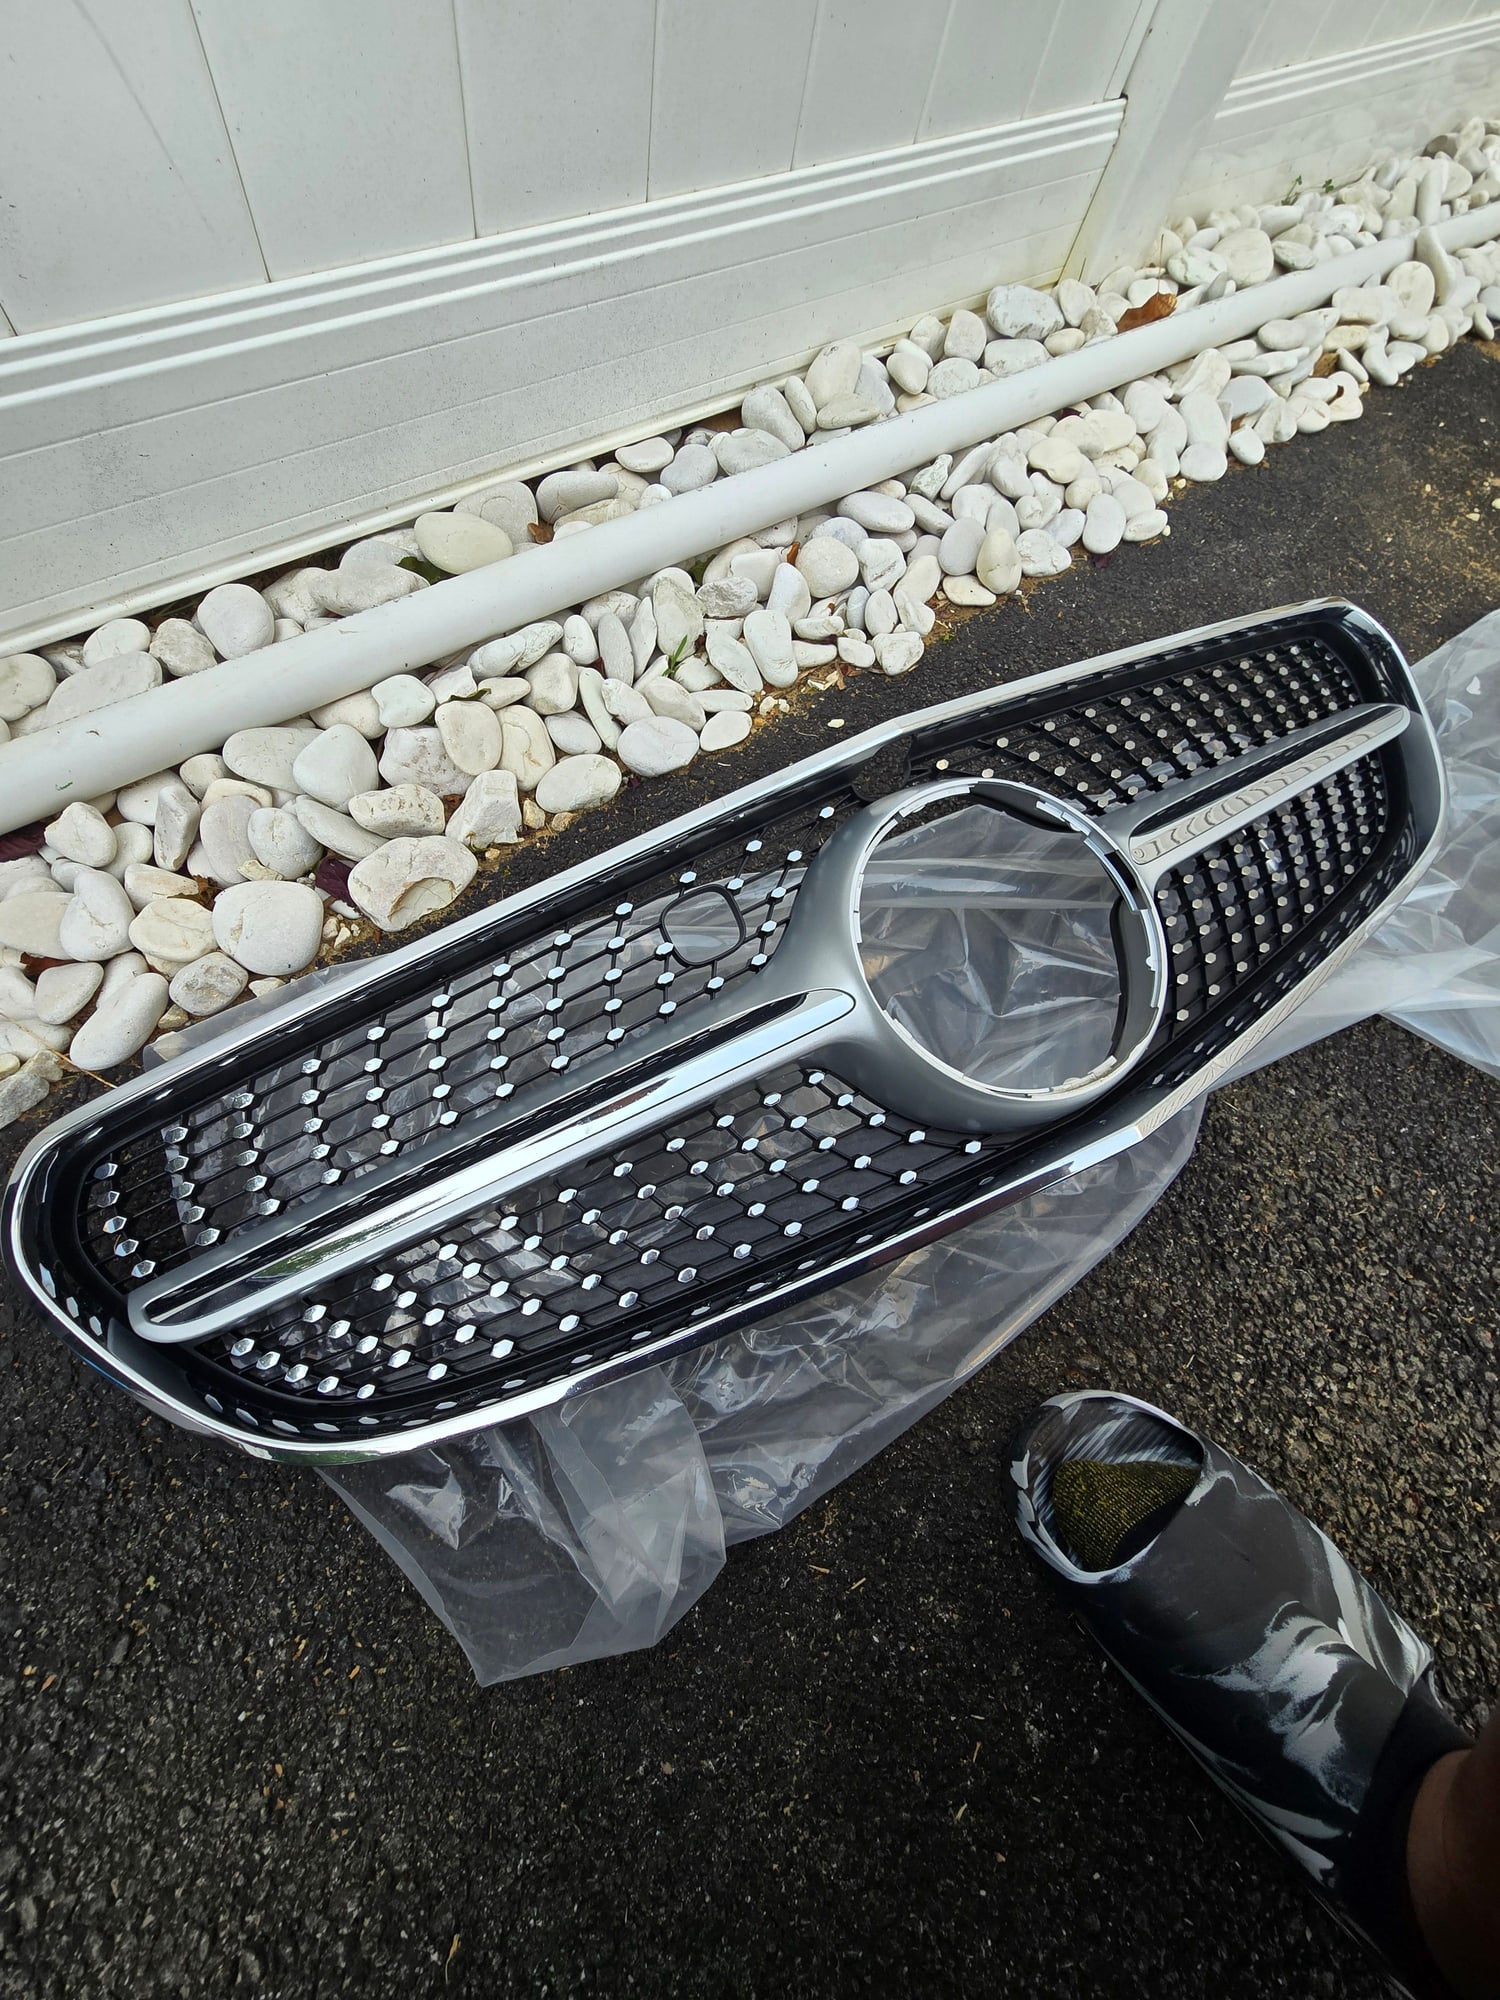 Exterior Body Parts - Factory Mercedes AMG Diamond Grille Flawless Condition - Used - 2015 to 2020 Mercedes-Benz S550 - Laurel, MD 20708, United States